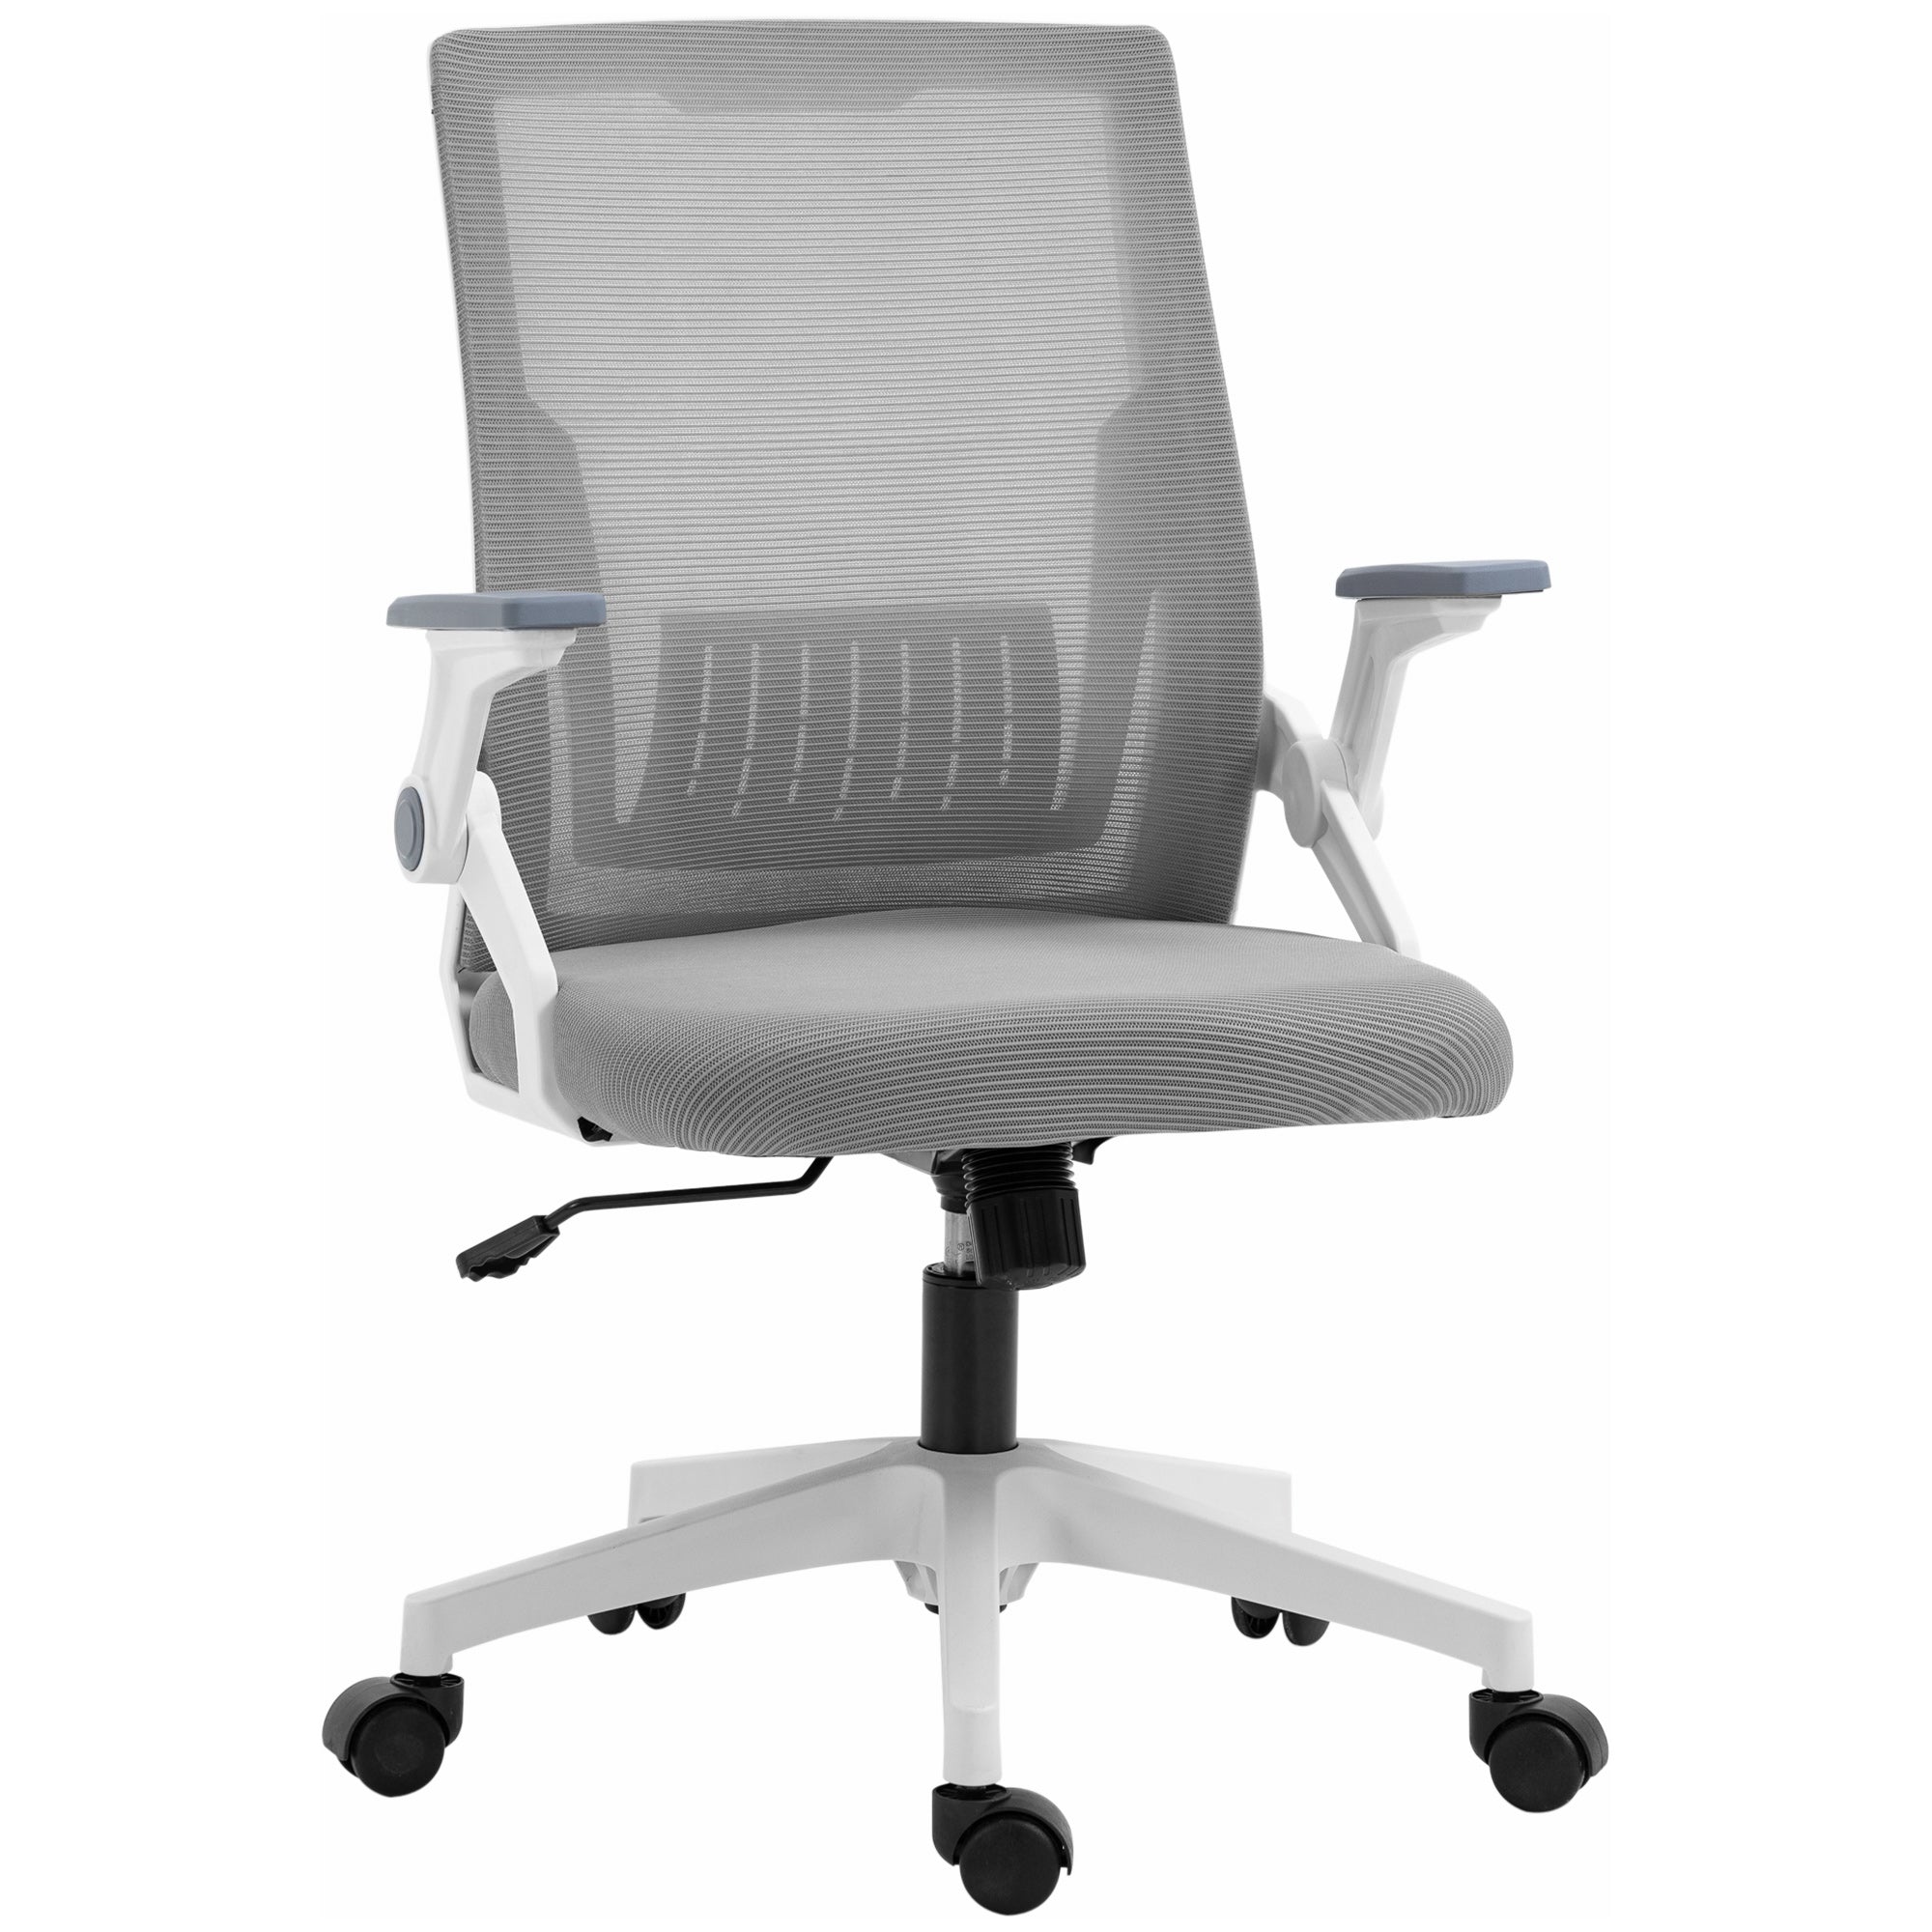 Vinsetto Mesh Office Chair - Desk Chair with Lumbar Support - Flip-up Armrest - Swivel Wheels - Adjustable Height - Grey  | TJ Hughes